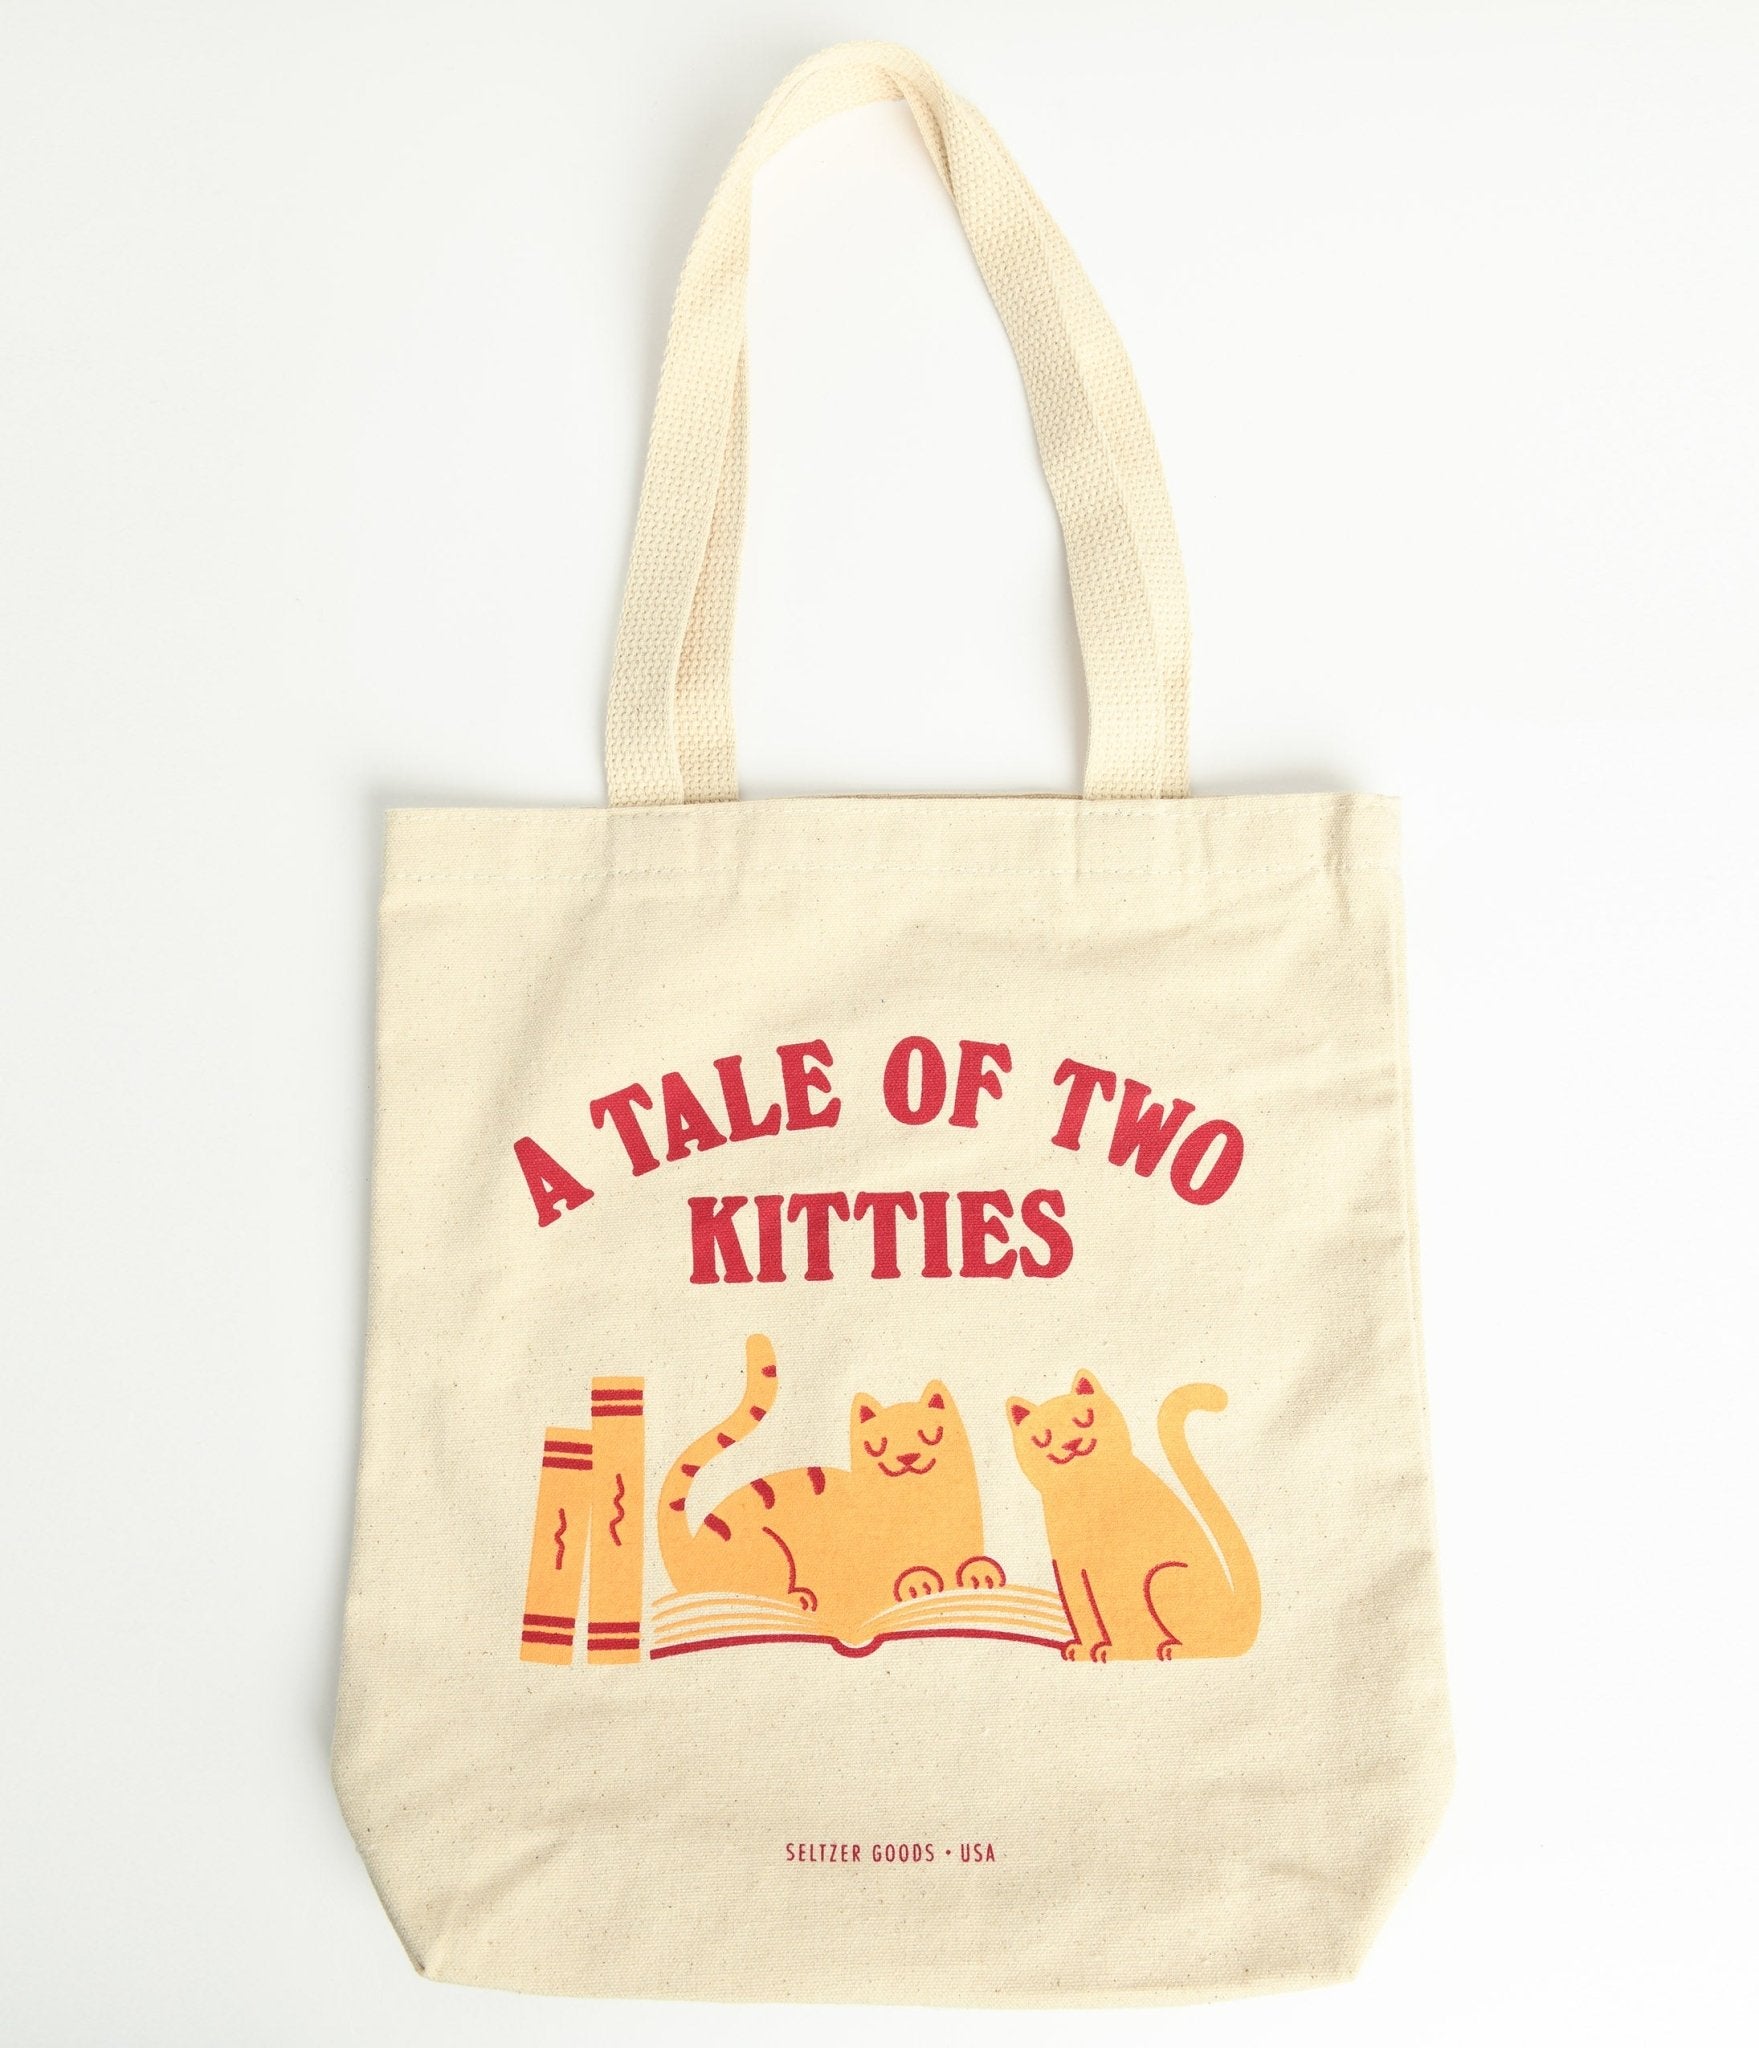 https://cdn.shopify.com/s/files/1/2714/9310/products/tale-of-two-kitties-canvas-tote-bag-973203.jpg?v=1703098195